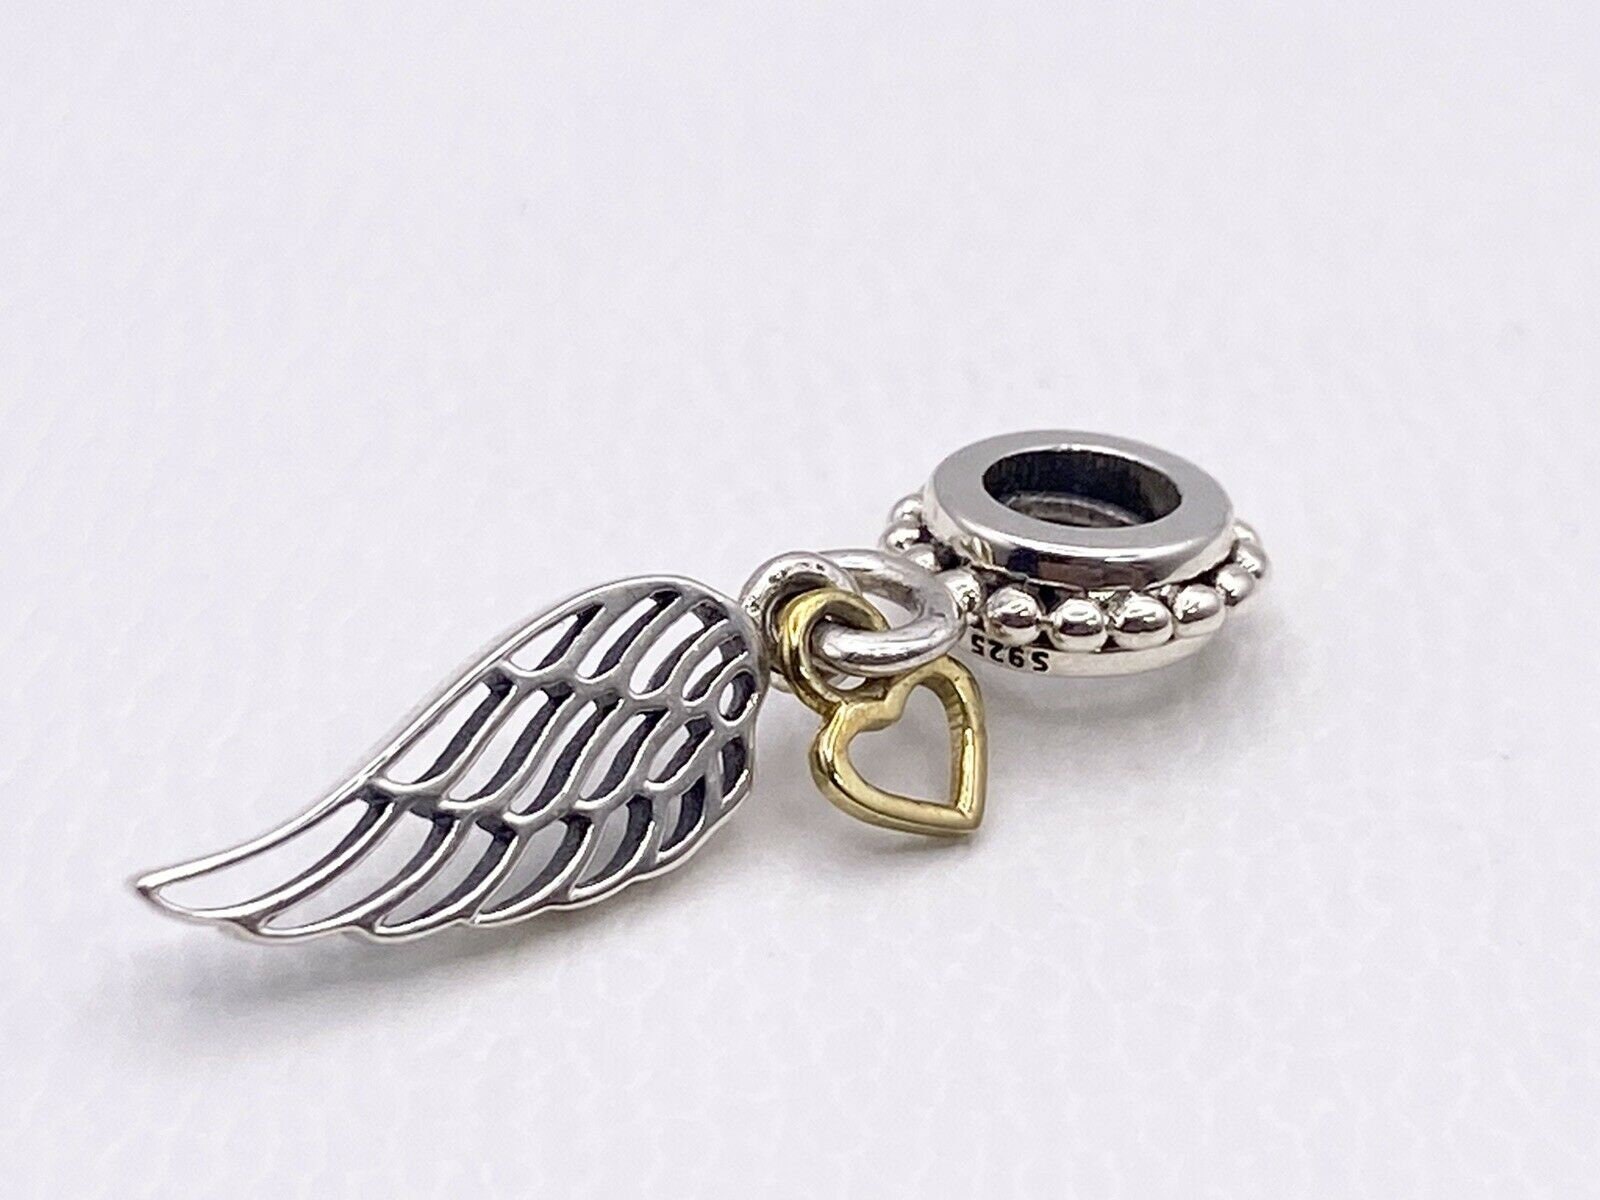 CandyCharms Angel Holding Heart Dangle Charms Beads For Bracelets